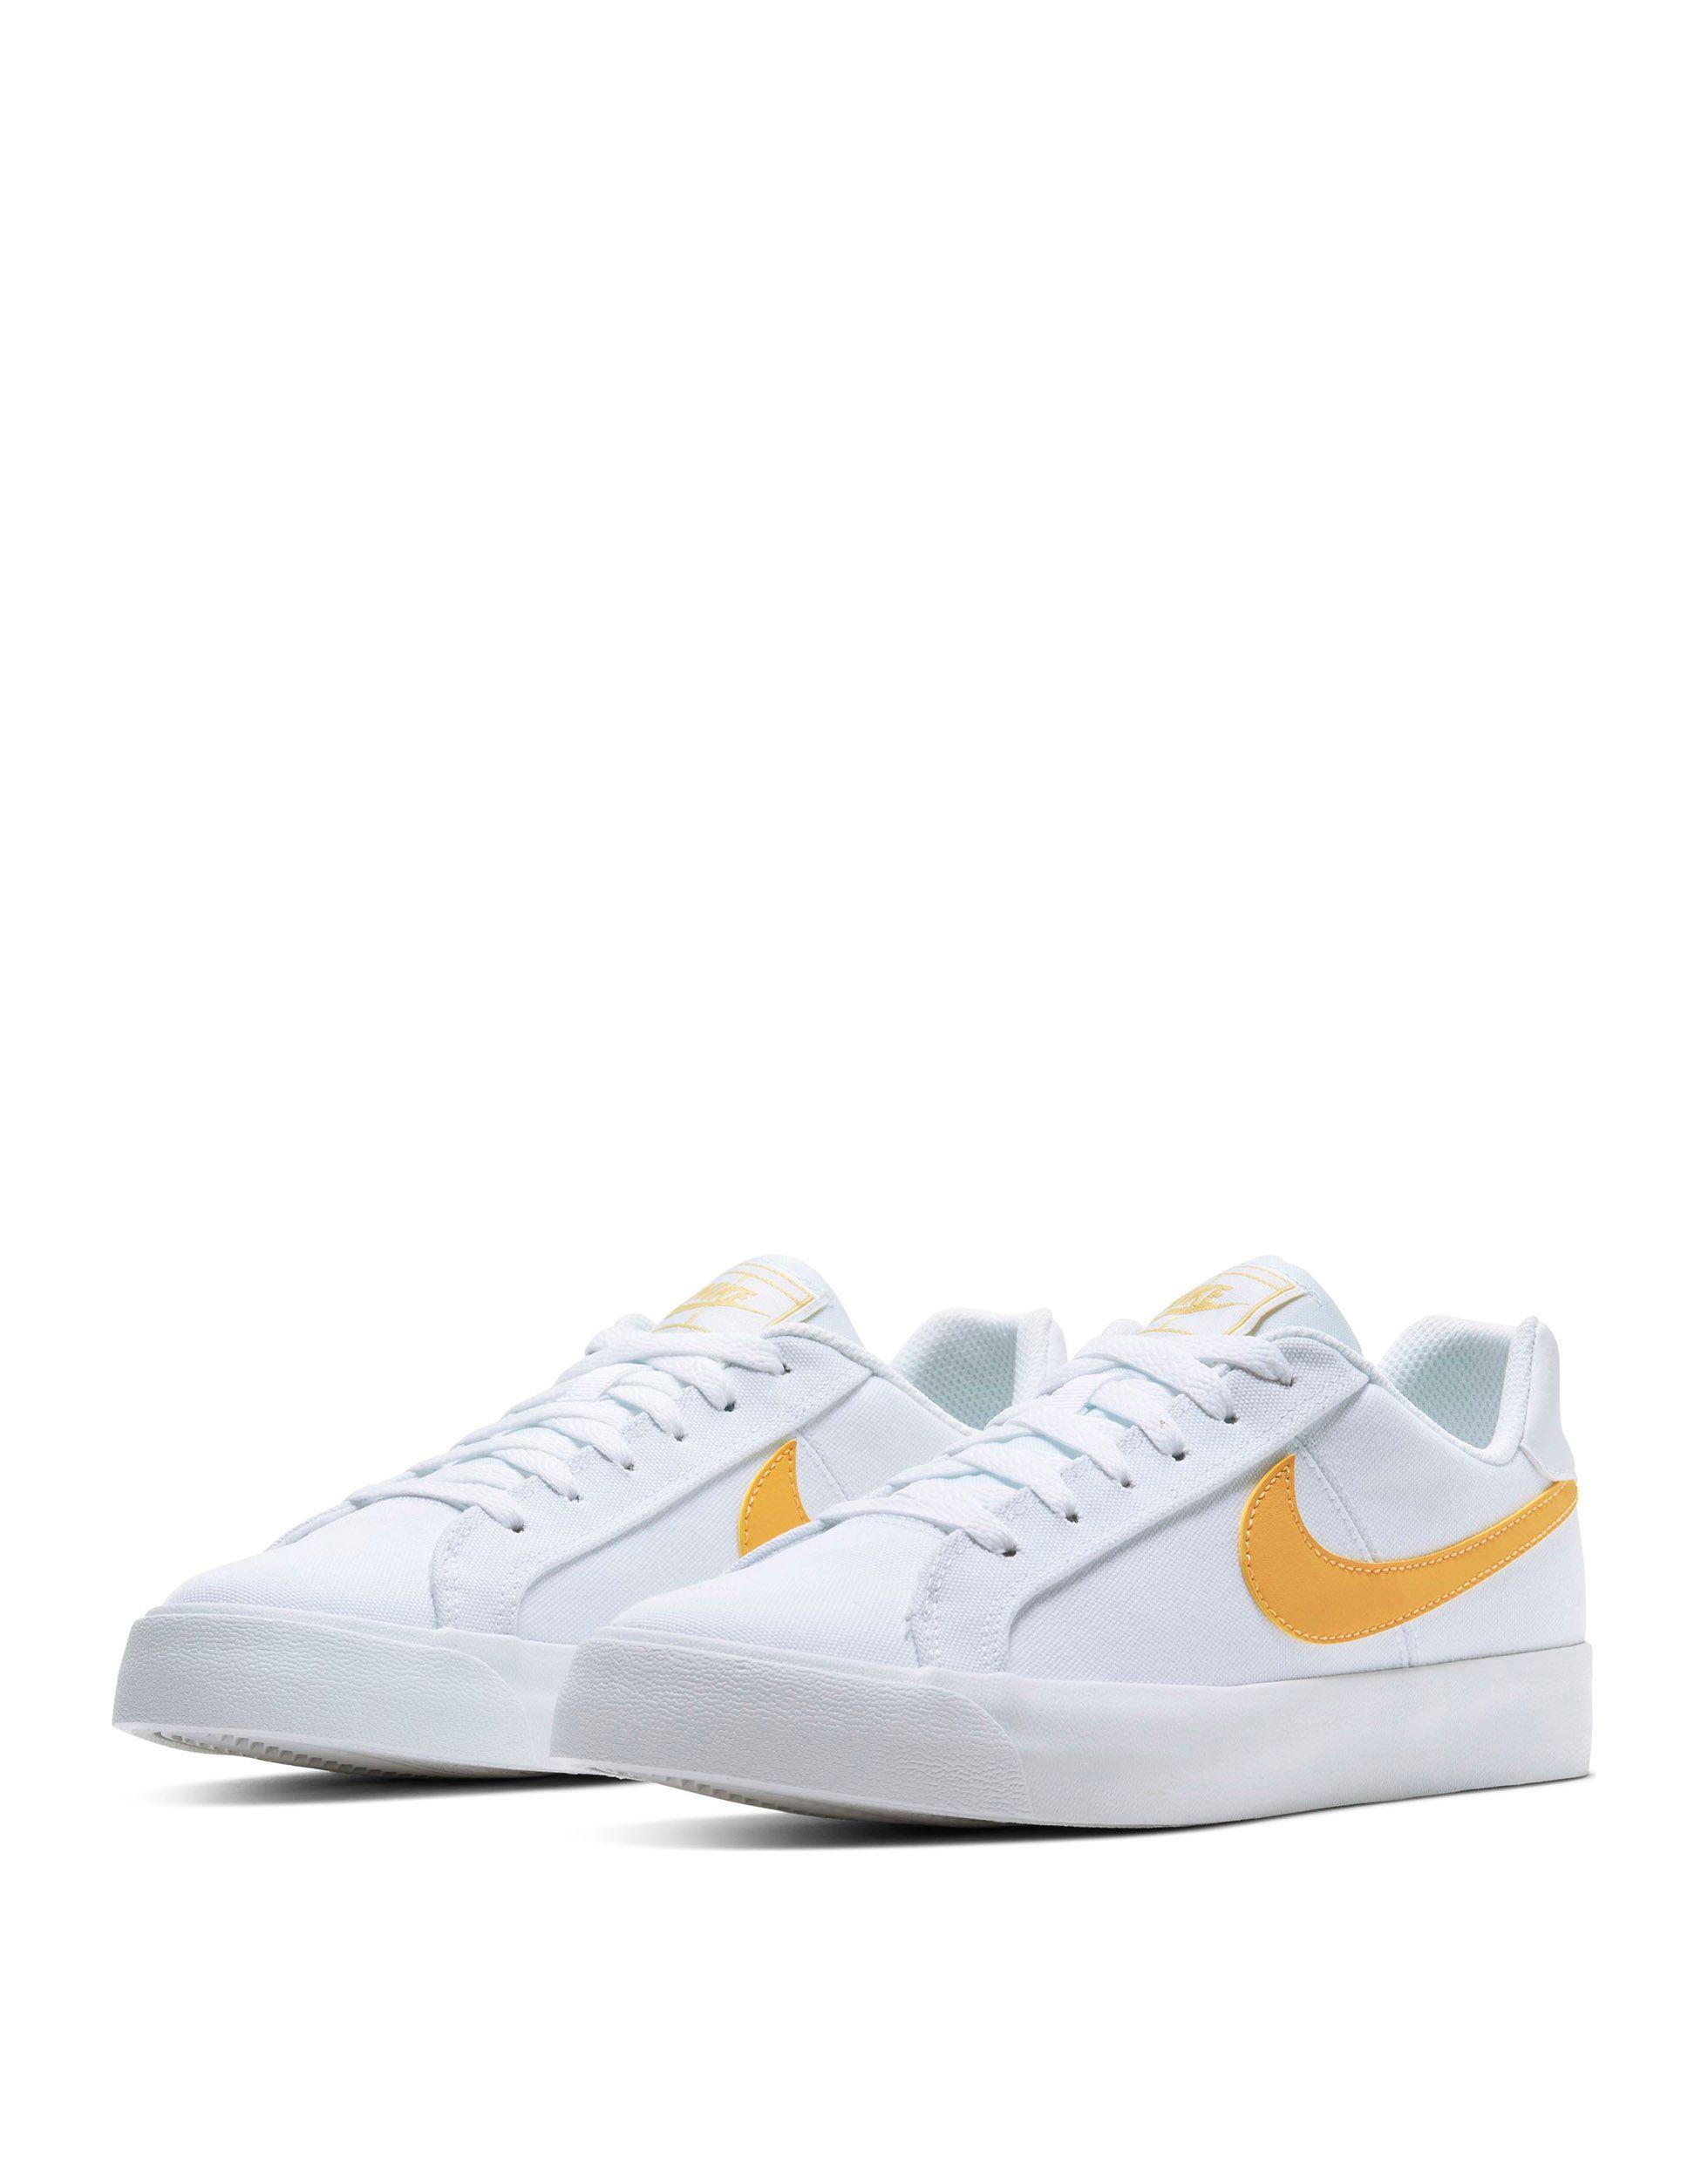 Nike Court Royale Ac Canvas Shoe in White - Lyst